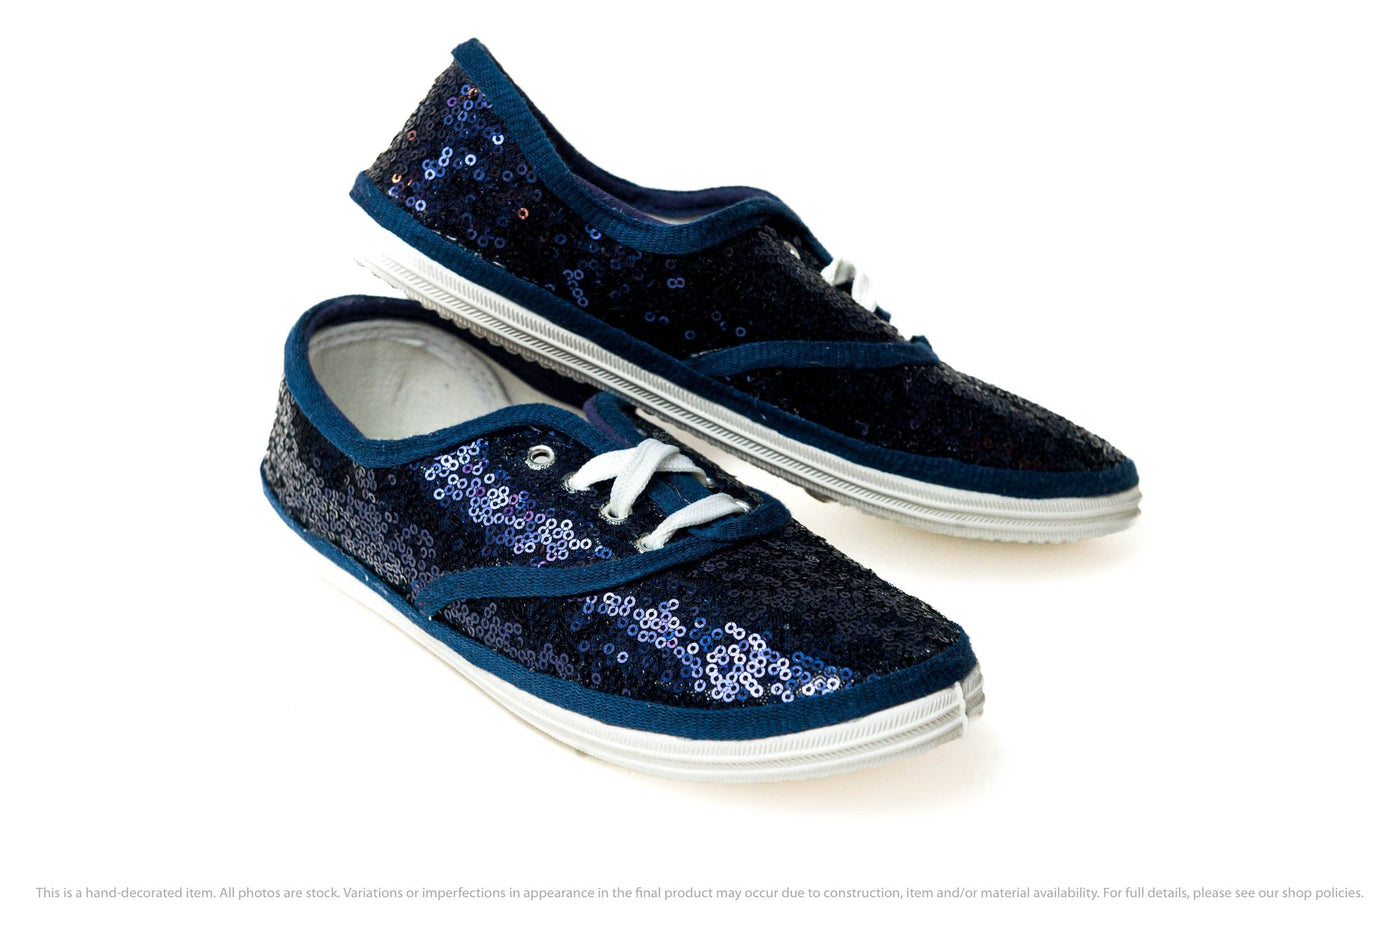 Navy Blue Sequin Sneakers by Princess Pumps